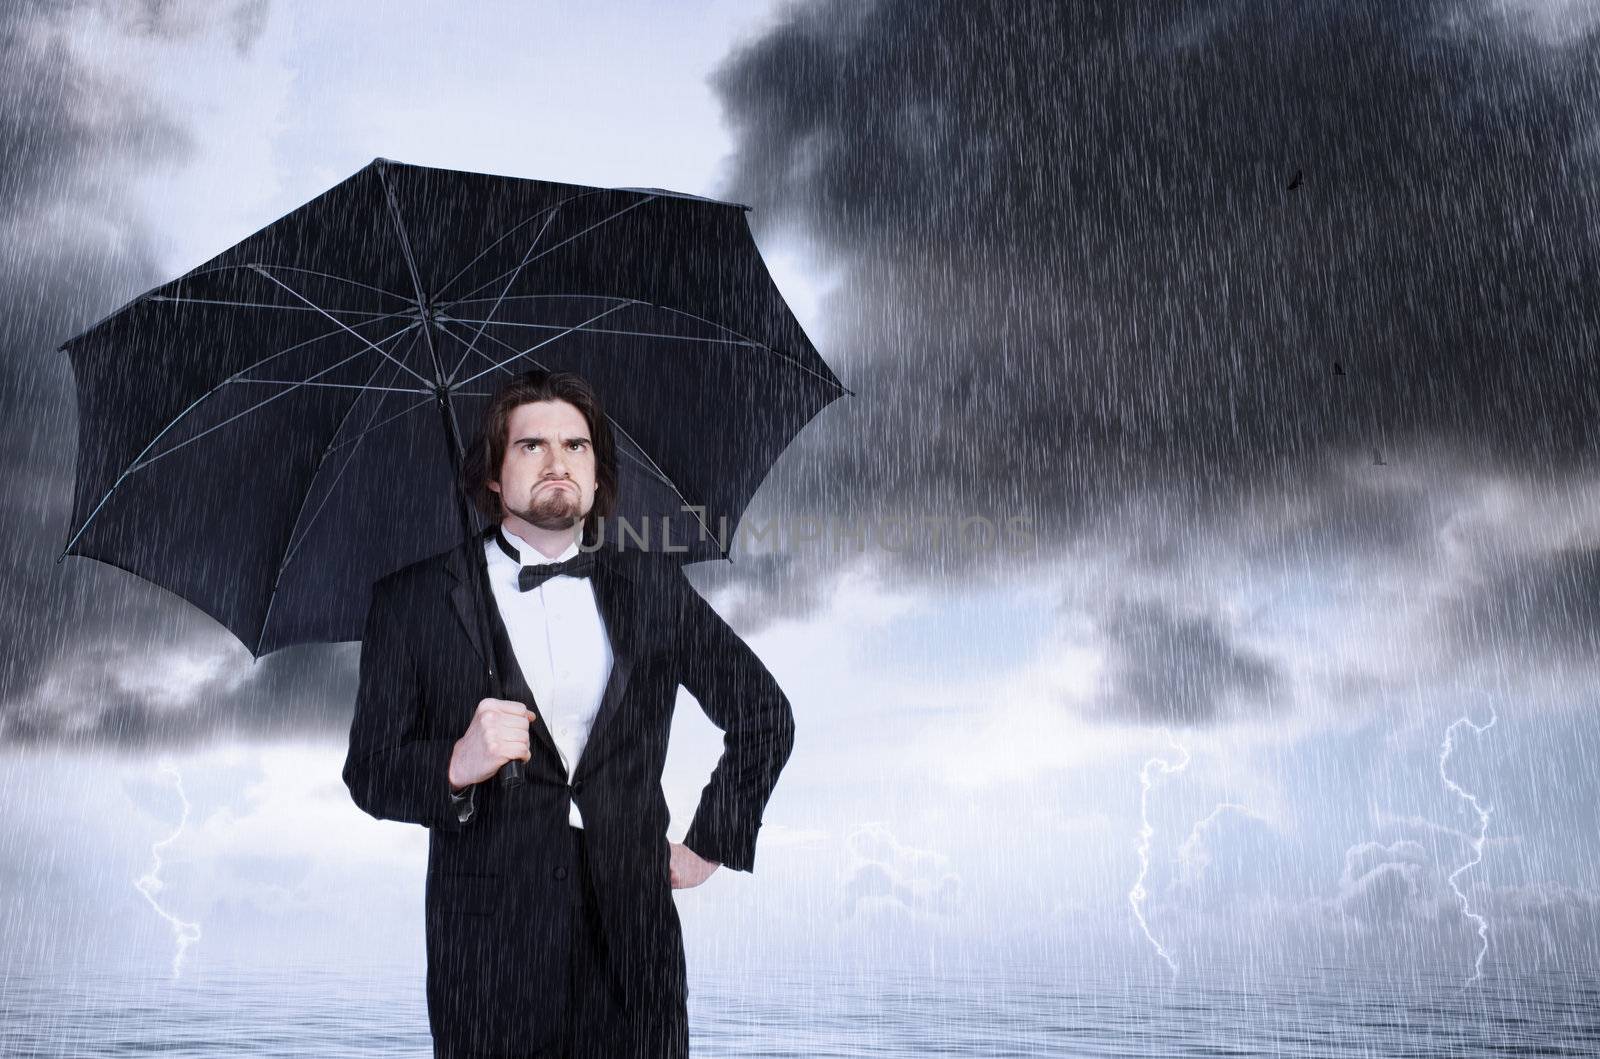 Man Holding Umbrella in the Rain and Frowning  by melpomene